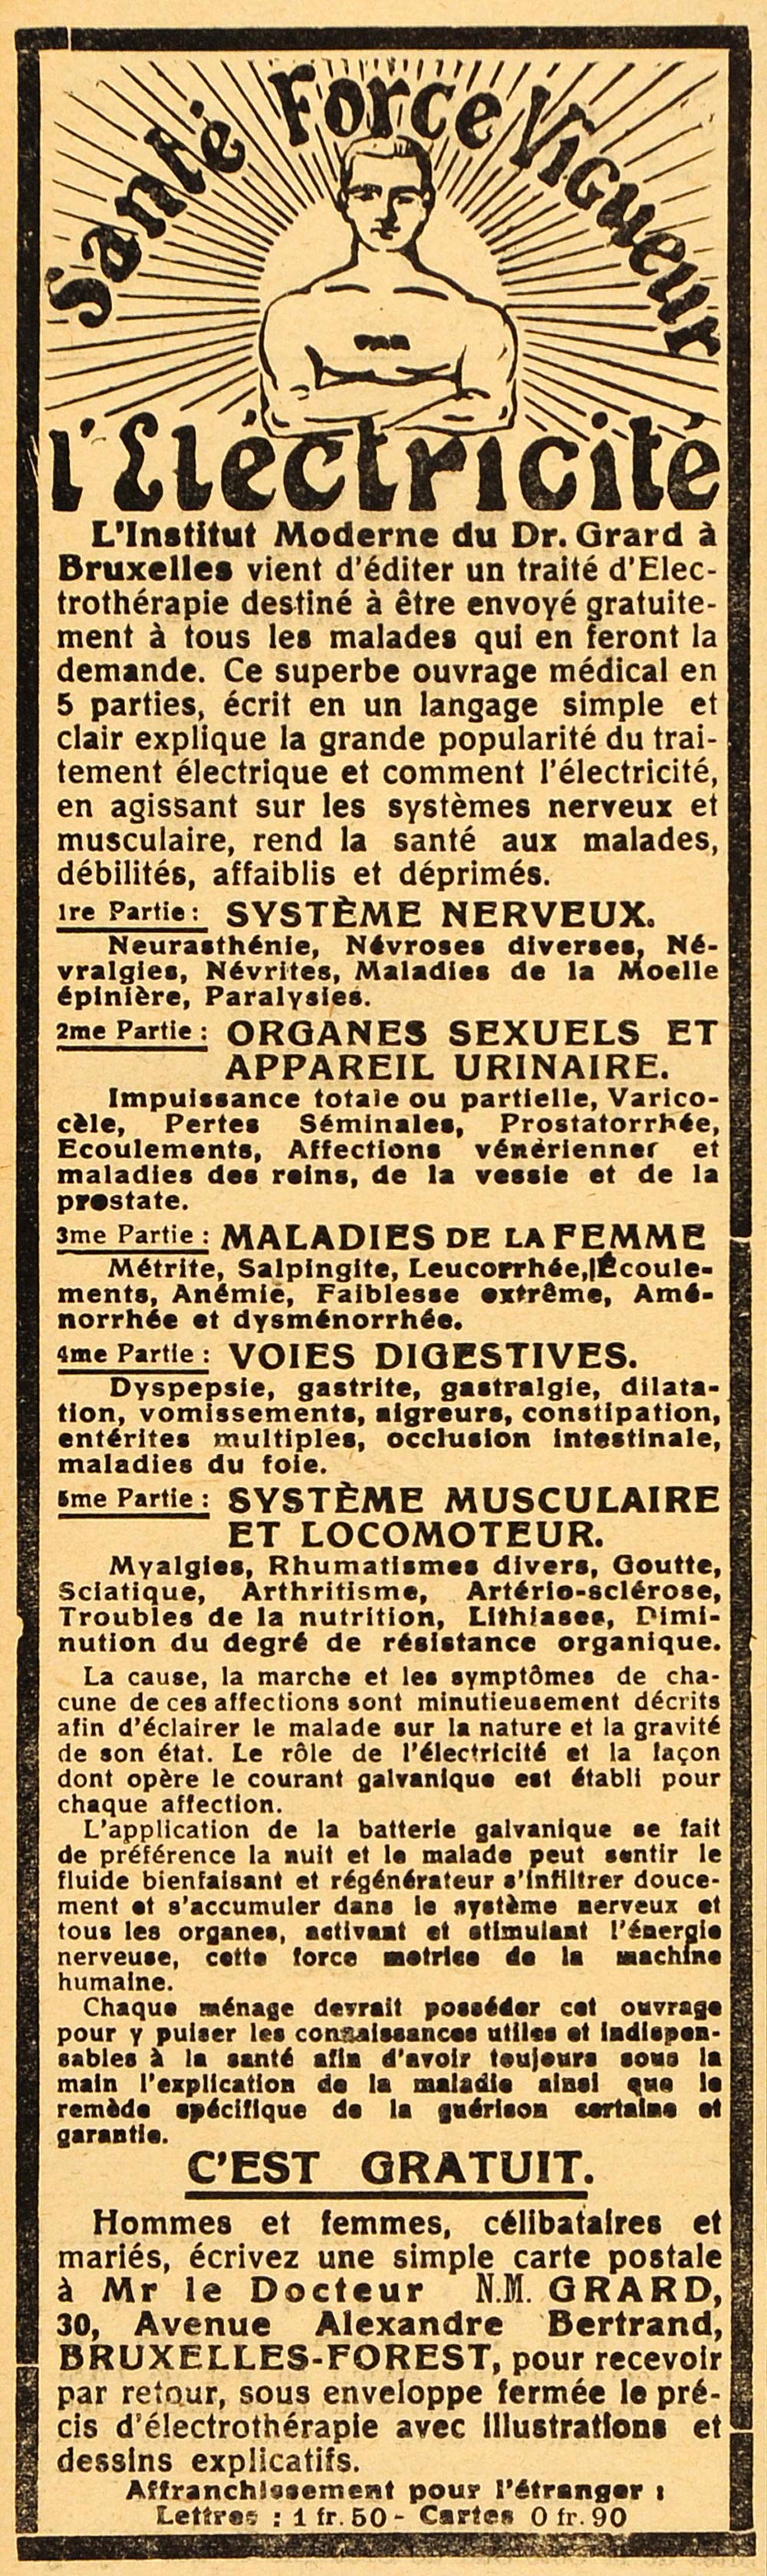 1926 French Ad Electrotherapy Treatment Grard Brussels - ORIGINAL FAN1